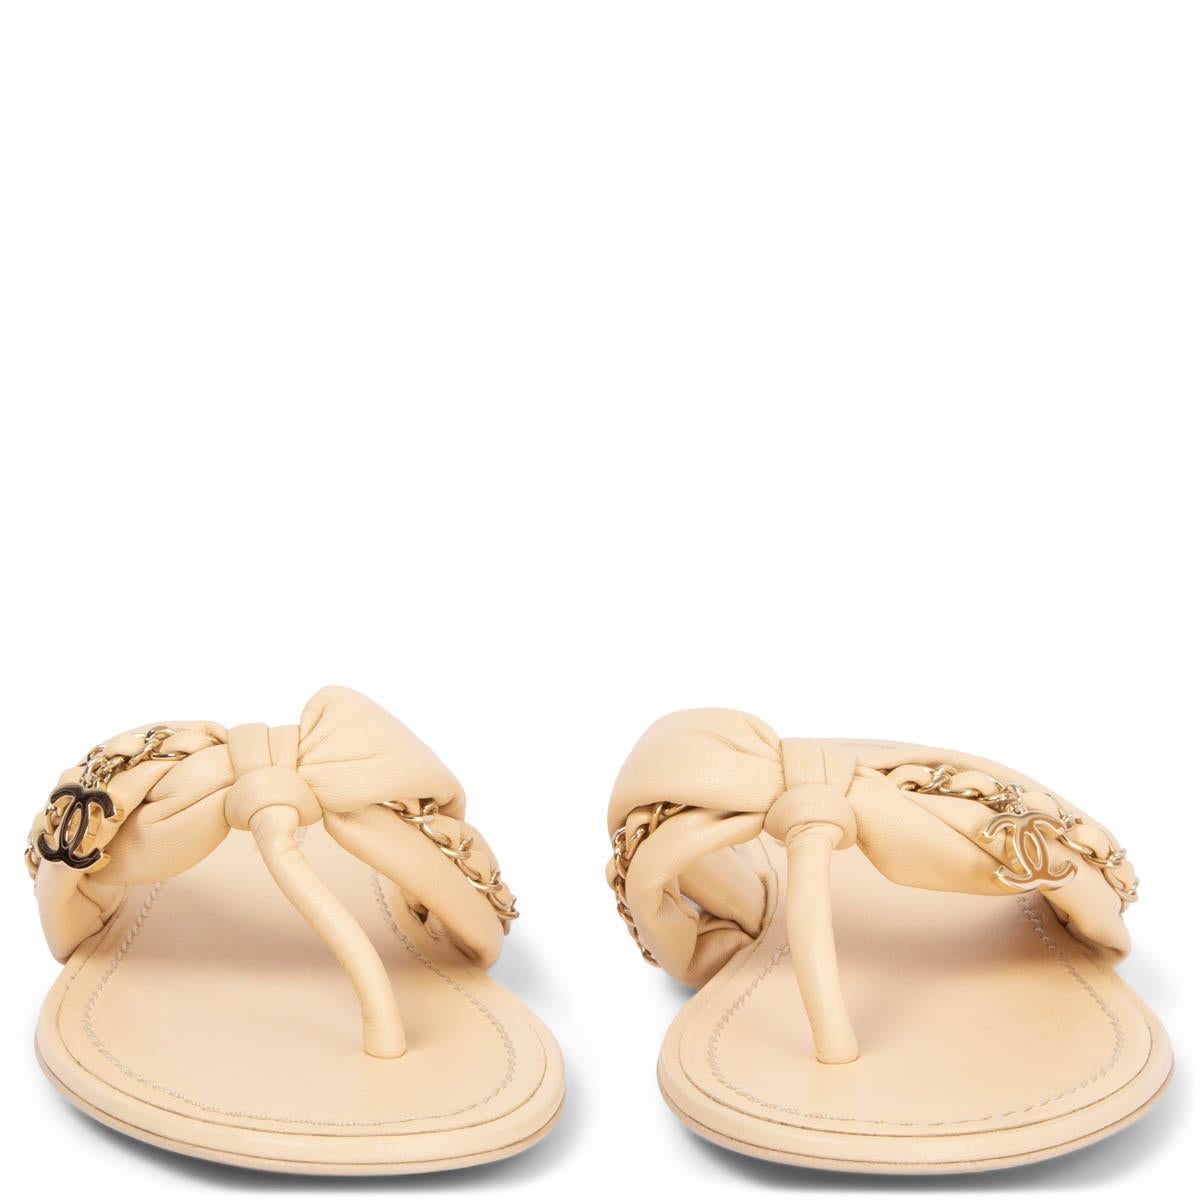 100% authentic Chanel flat thong sandals in light beige lambskin leather embellished with a gold-tome chain detail and CC dangling logo. Brand new. Come with dust bag. 

2022 Spring/Summer

Measurements
Model	Chanel22S G38210
Imprinted Size	39 (run